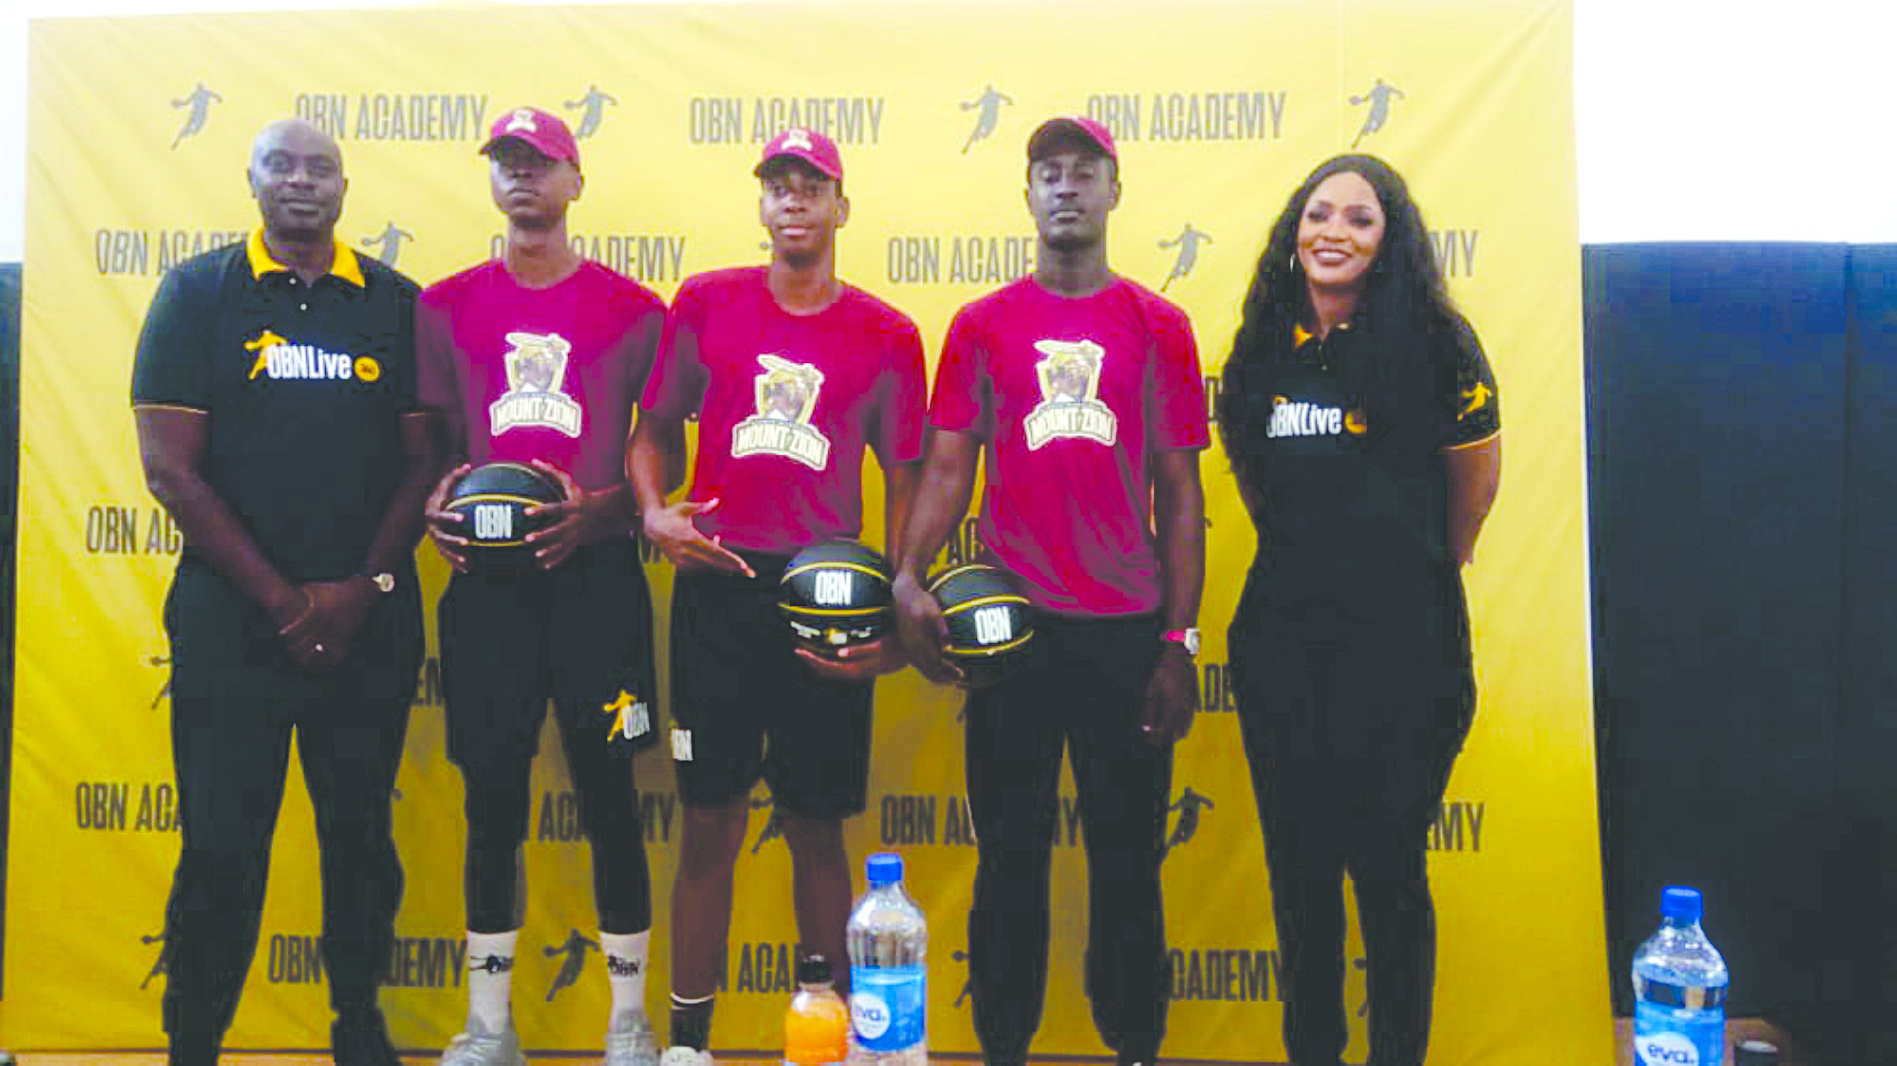 BASKETBALL: OBN Academy sends 3 to US on scholarship